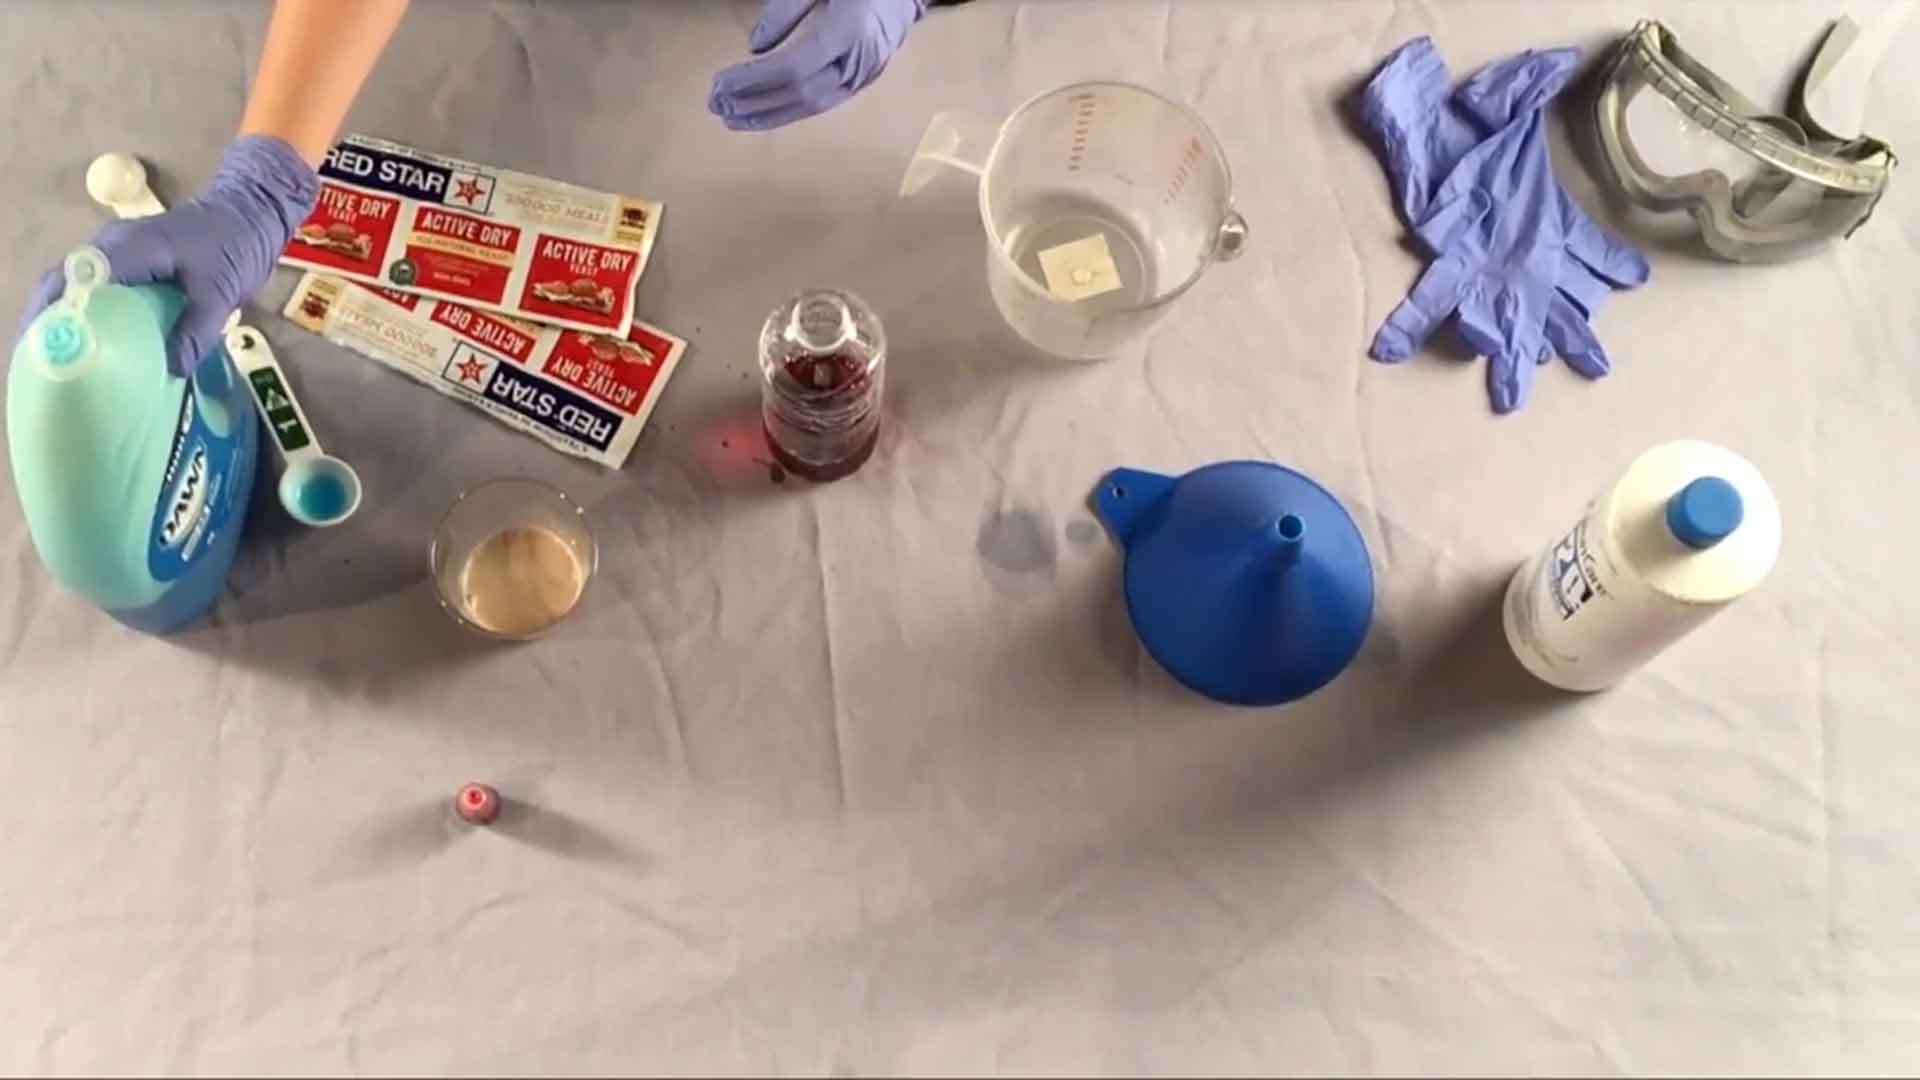 Different items on a table, including Dawn dish soup, a funnel, measuring cup, gloves, and safety goggles